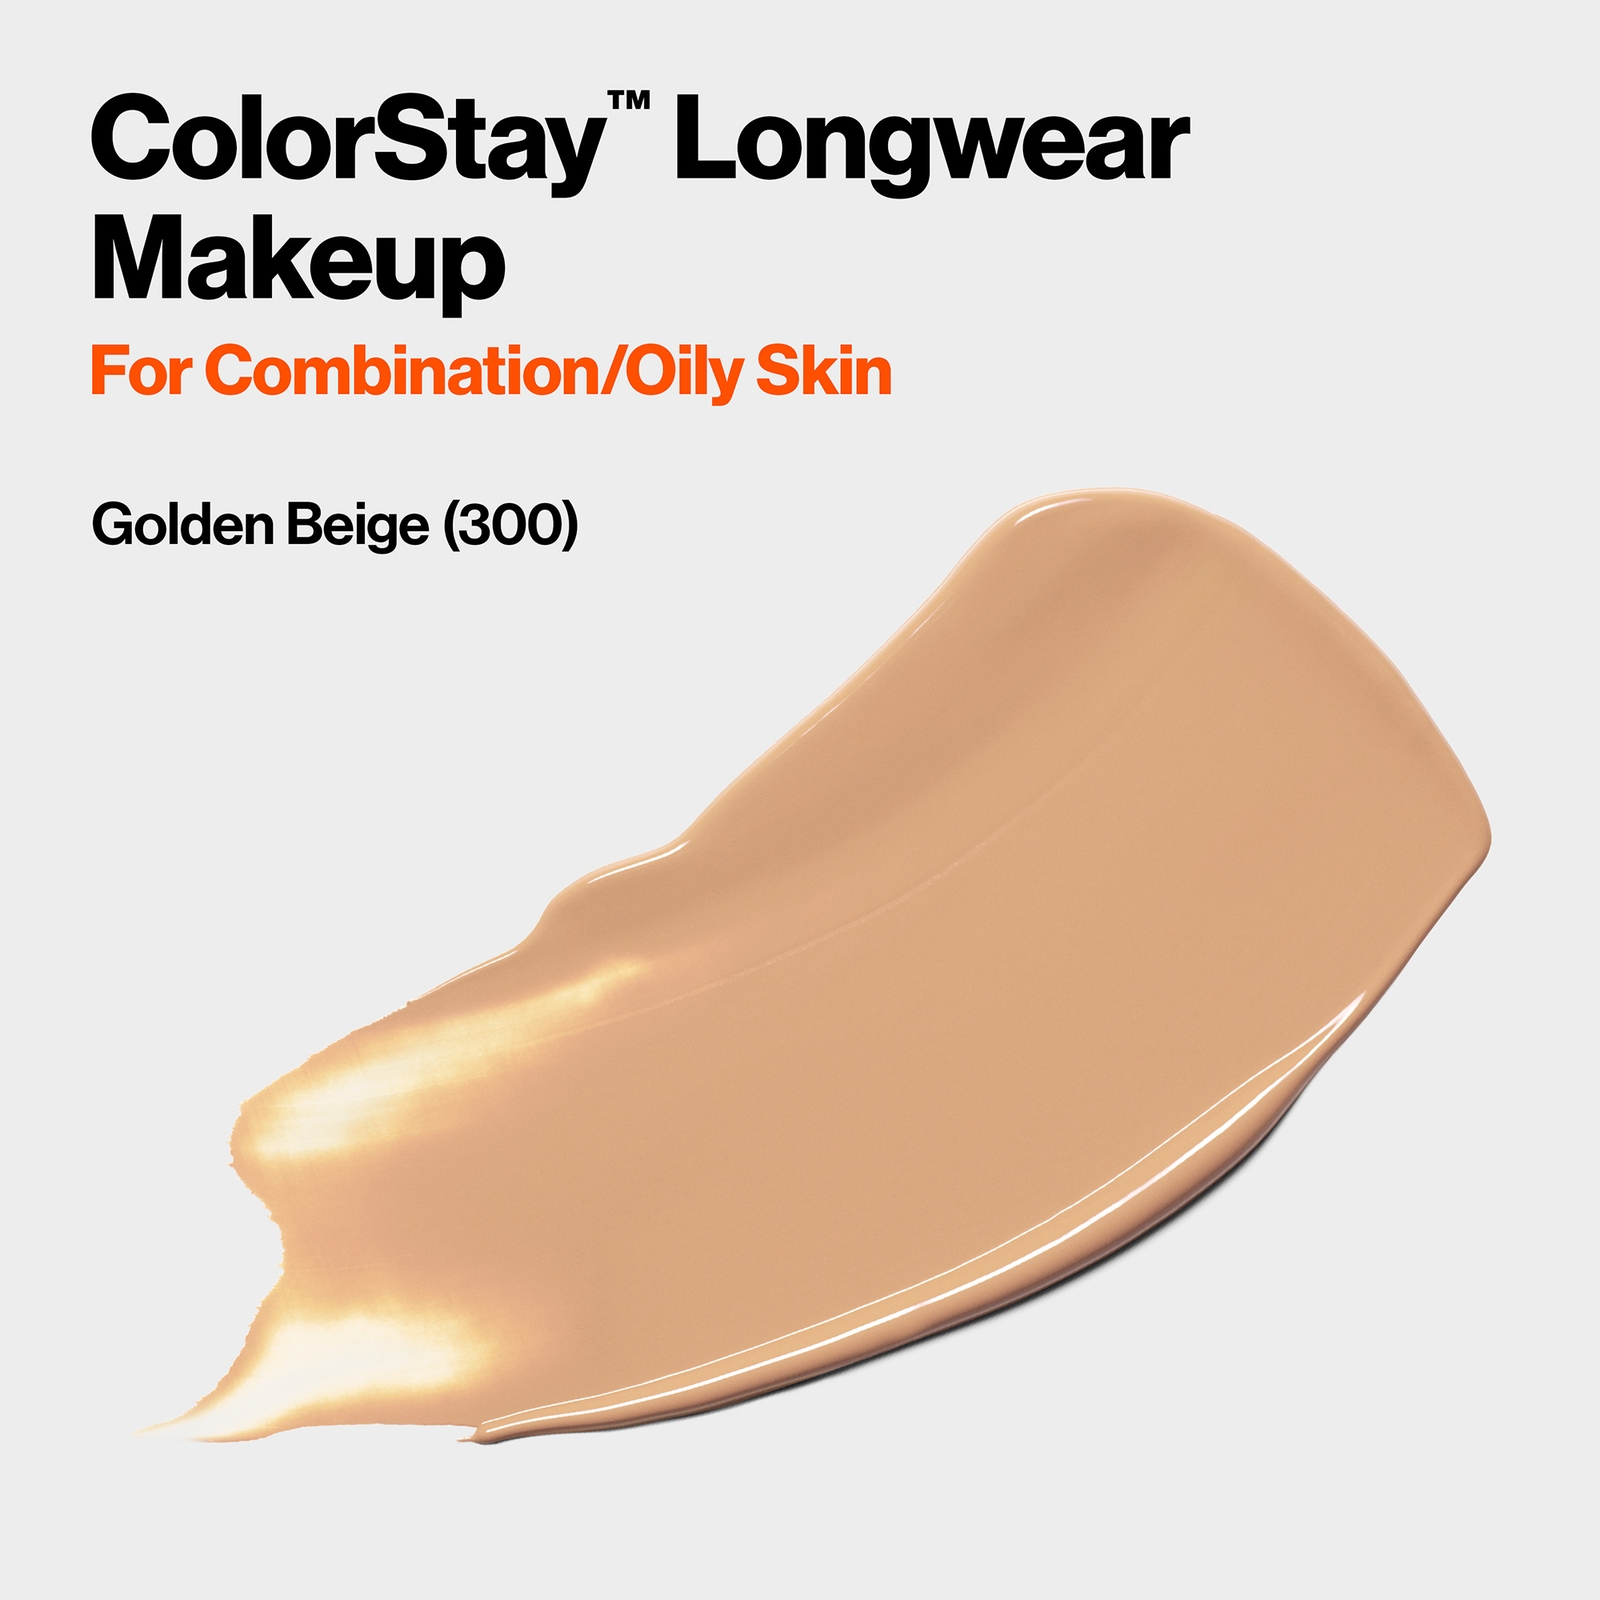 Revlon ColorStay Make-Up Foundation for Combination/Oily Skin (Various Shades) - Golden Beige